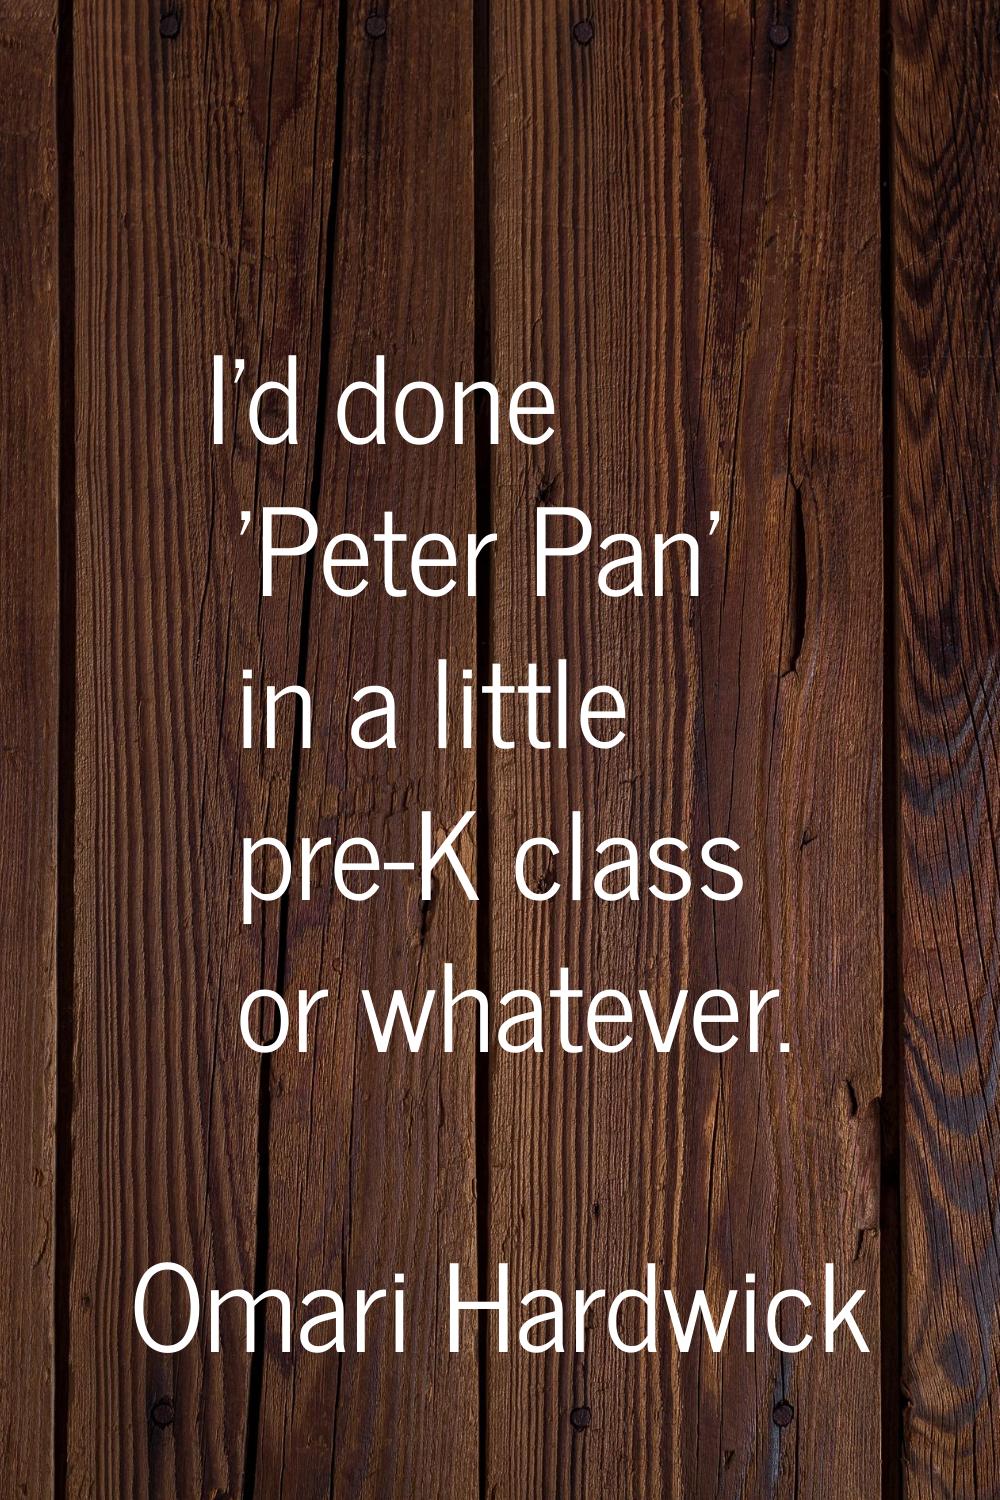 I'd done 'Peter Pan' in a little pre-K class or whatever.